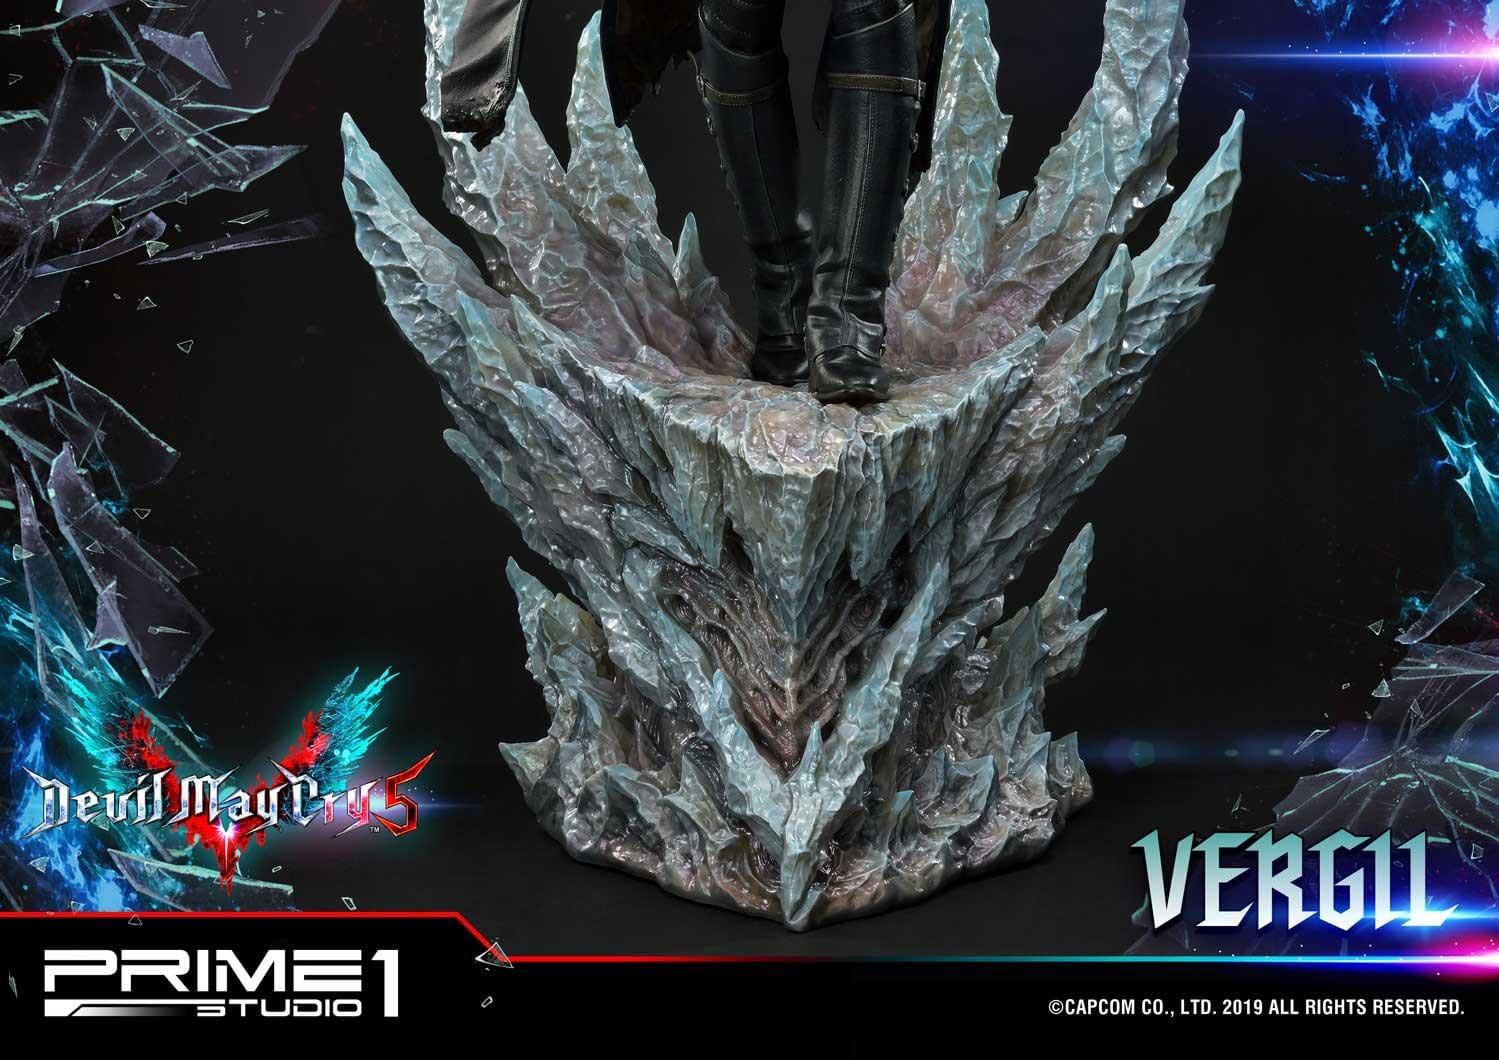 Devil May Cry 5 Vergil Gets New Statue From Prime 1 Studio - project devil may cry roblox